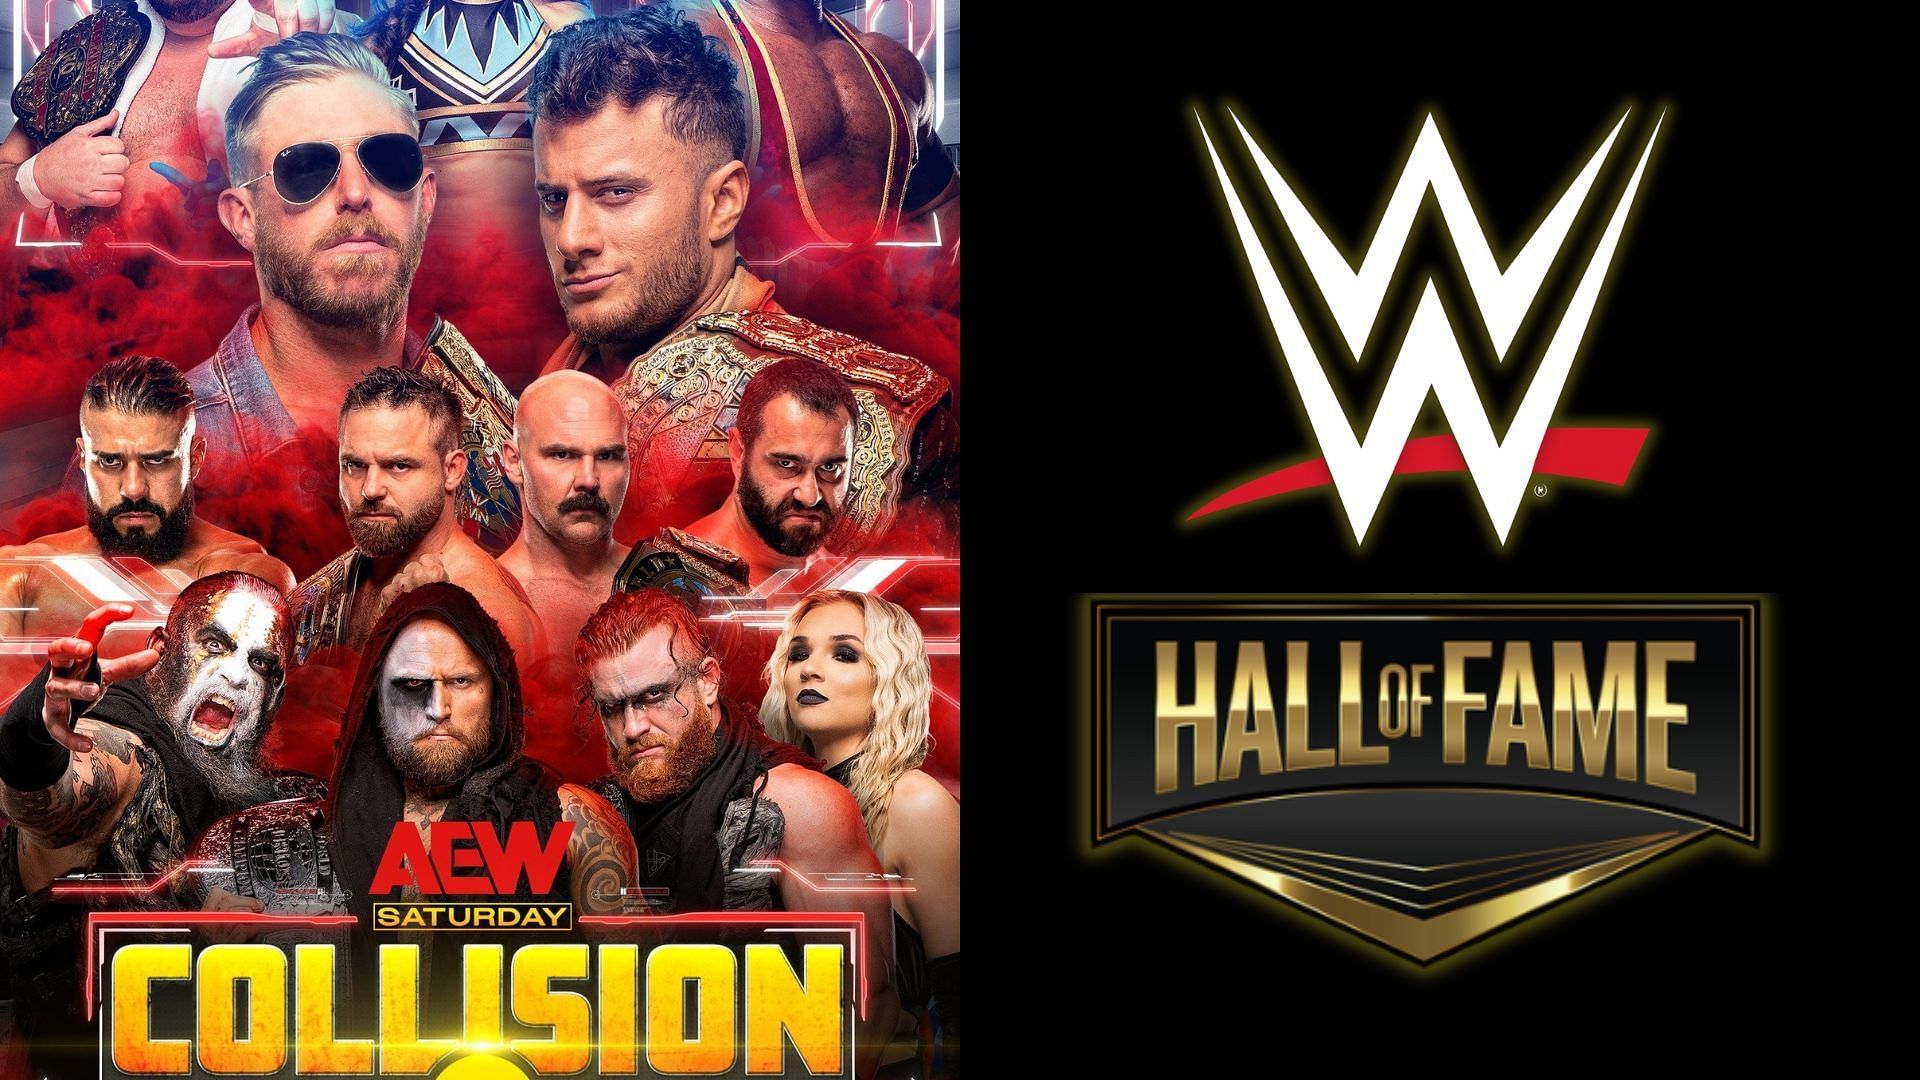 AEW Collision is set to premiere on June 17th.